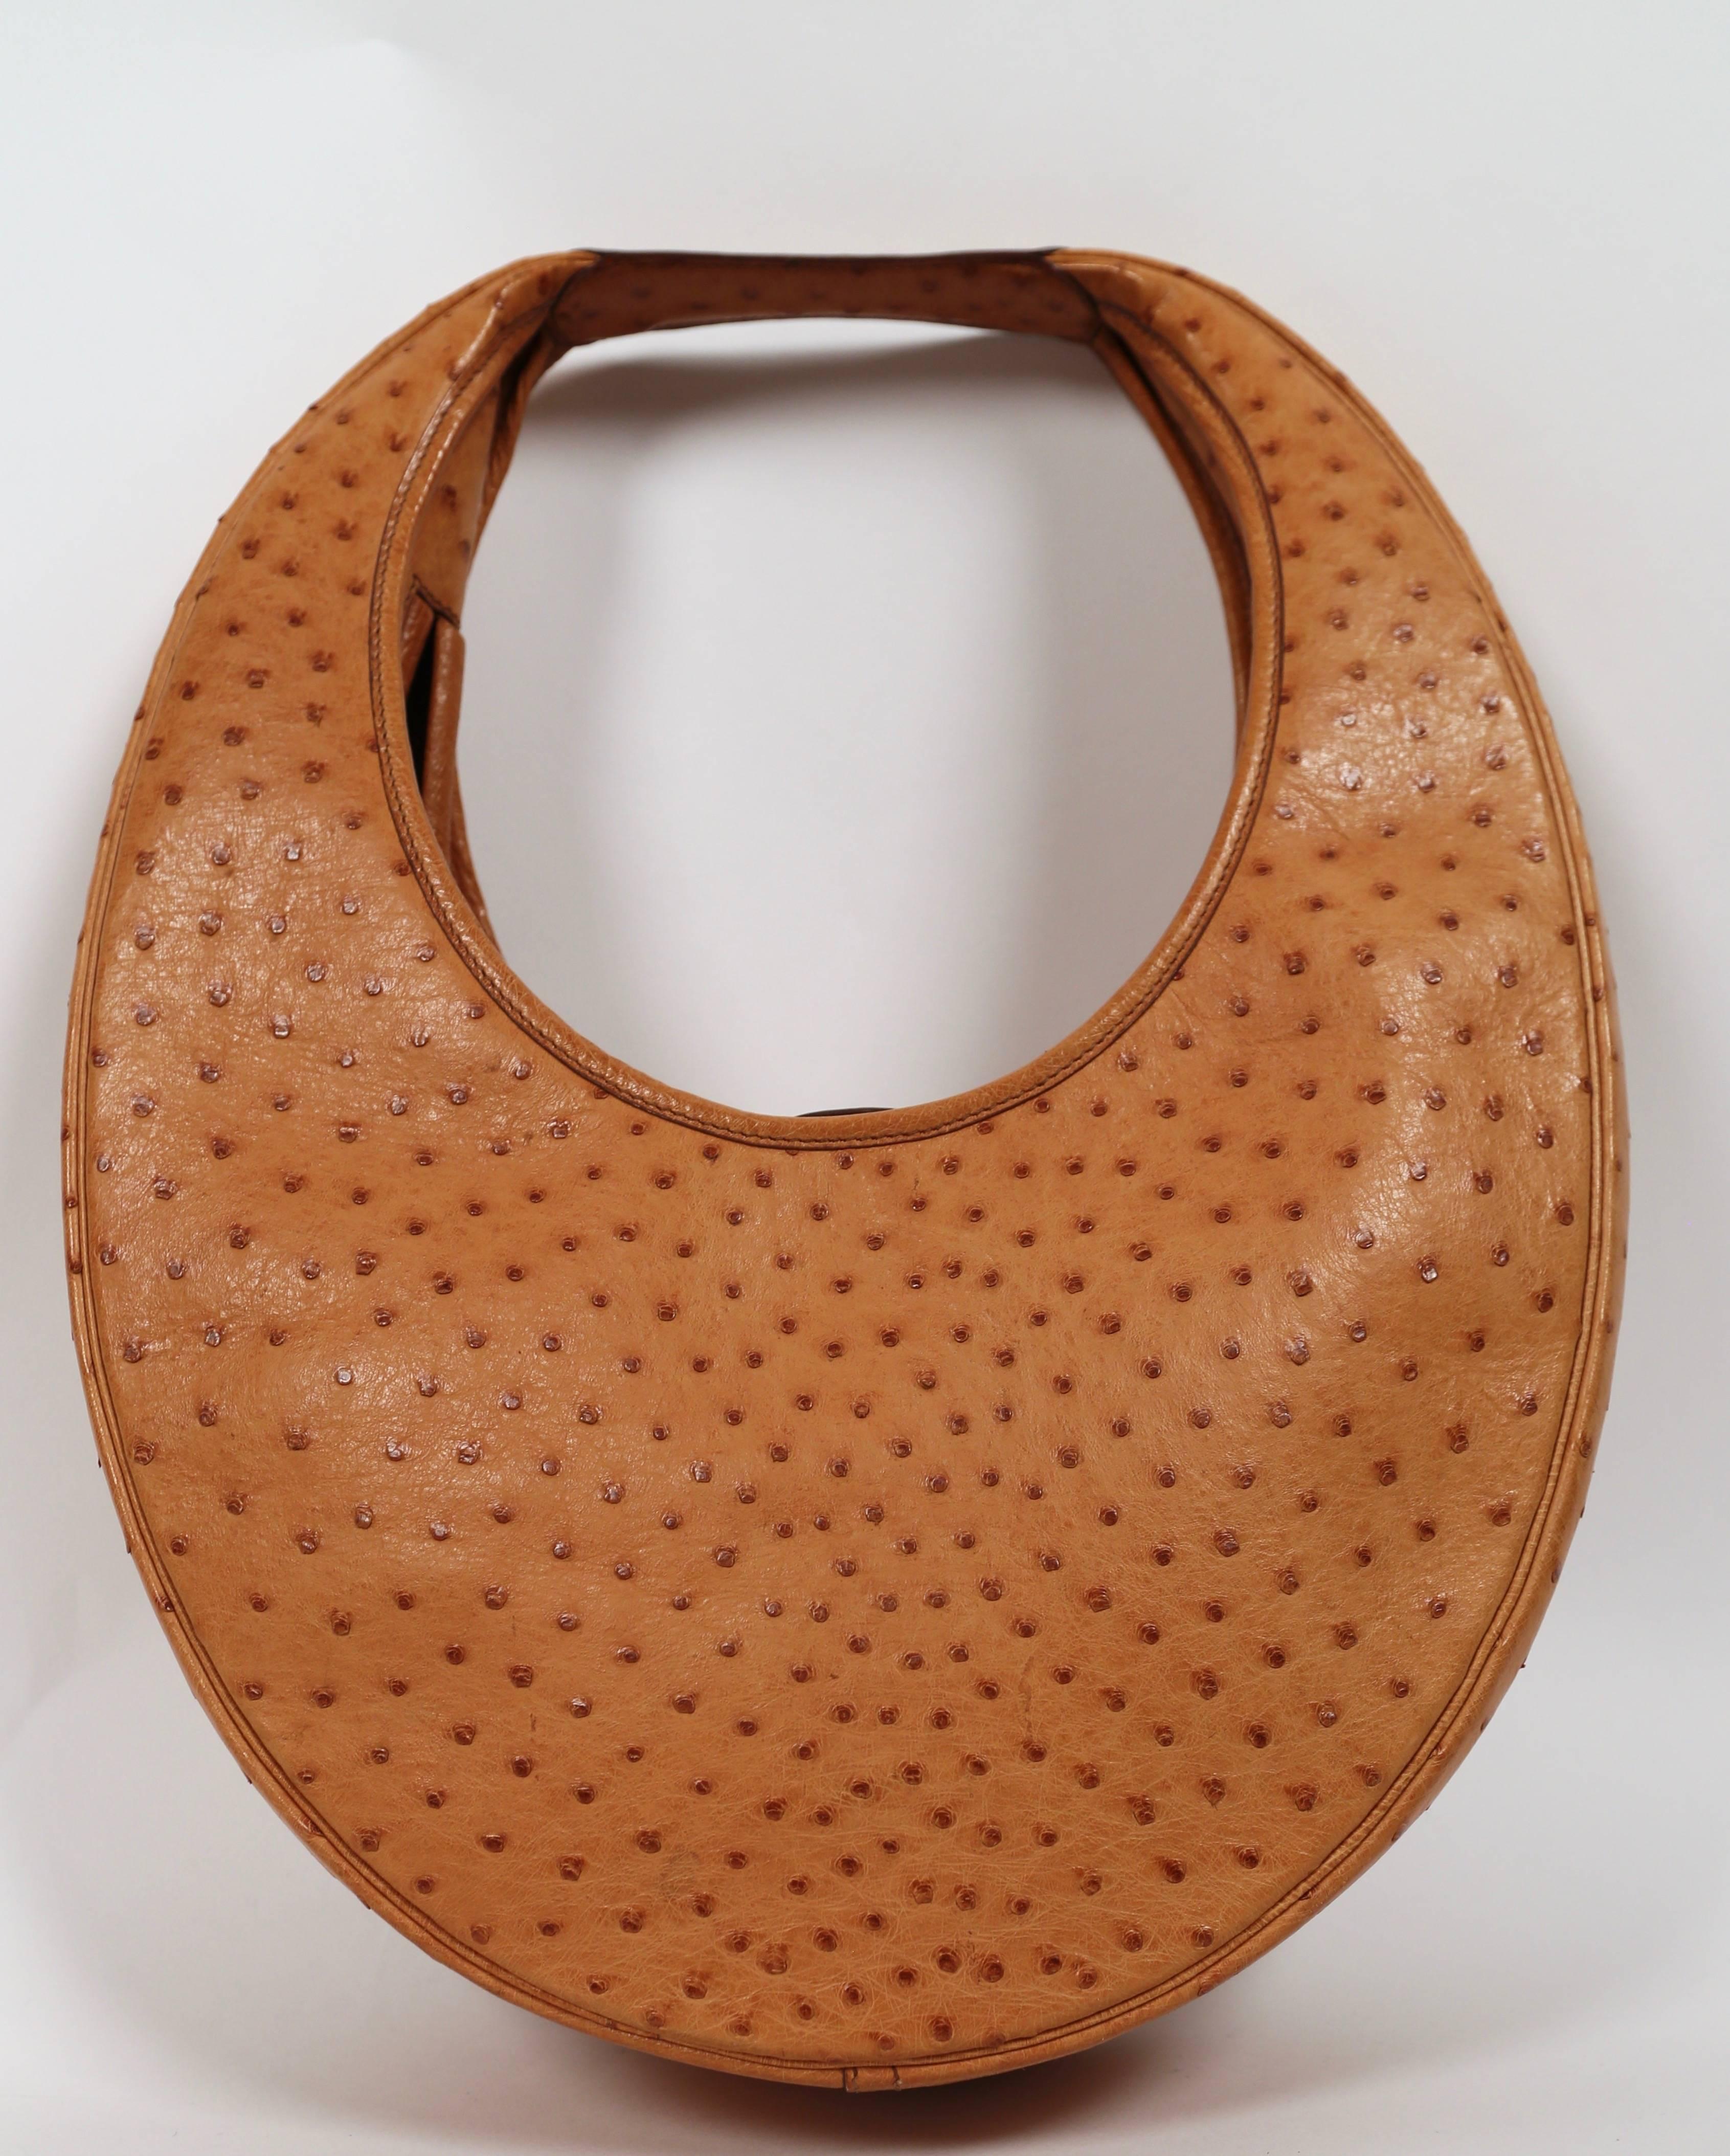 Very rare gold ostrich leather circular 'Folies' bag from Hermes dating to 1989. Measures approximately: 13